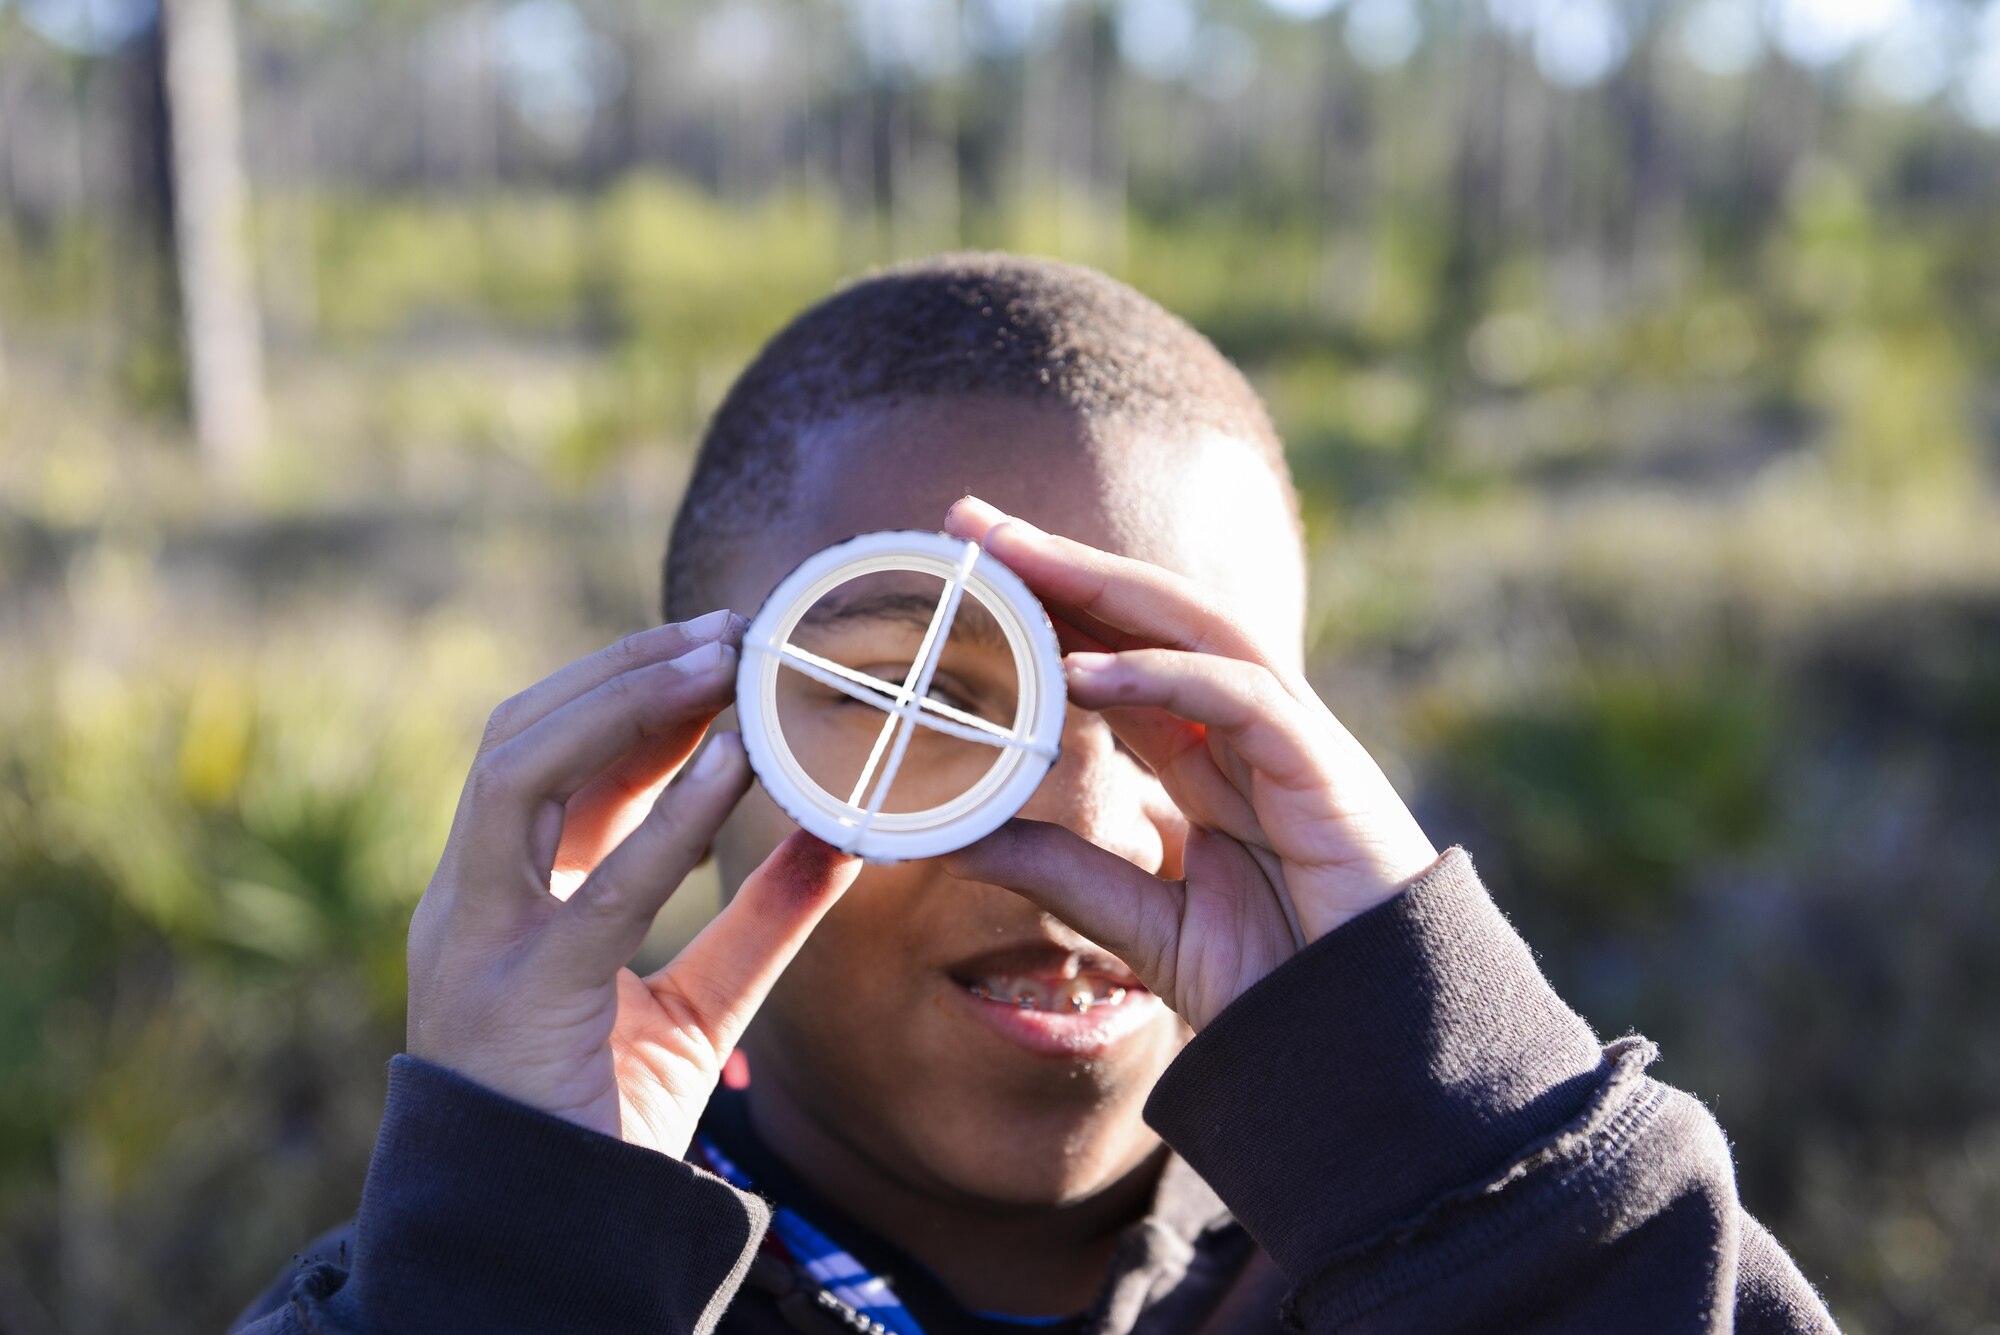 A child from the Hurlburt youth group experiments with string and a pipe during a trip to collect deployed cameras at Hurlburt Field, Fla., Feb. 5, 2015. Children on the trip were asked to observe their surroundings, collect data and study the vegetation in the different areas. (U.S. Air Force photo Senior Airman Meagan Schutter/Released)